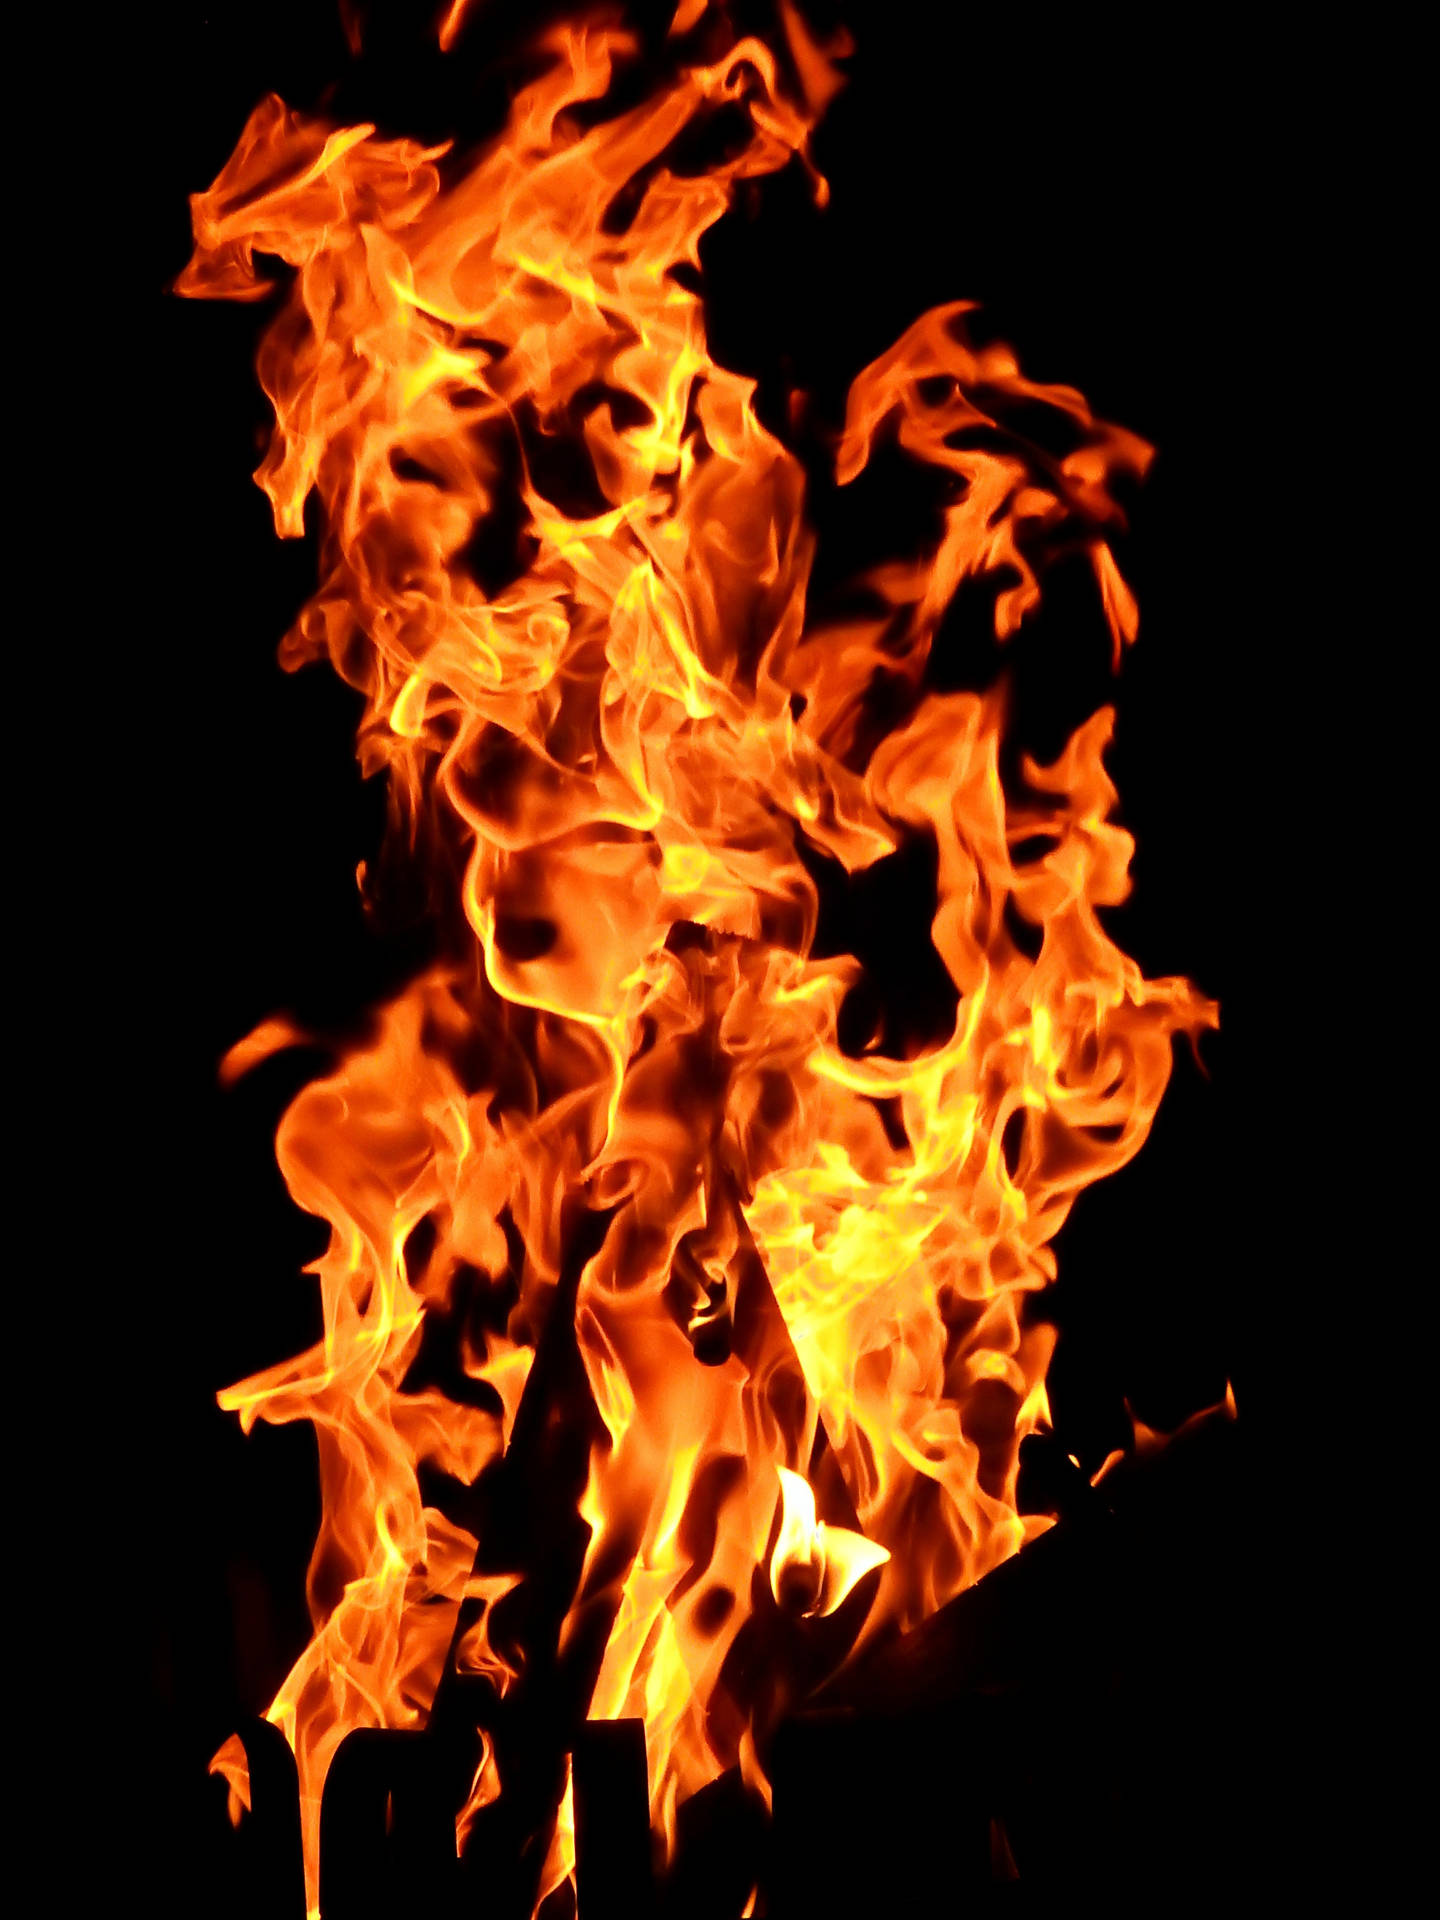 Red Fire With Odd Shapes Wallpaper